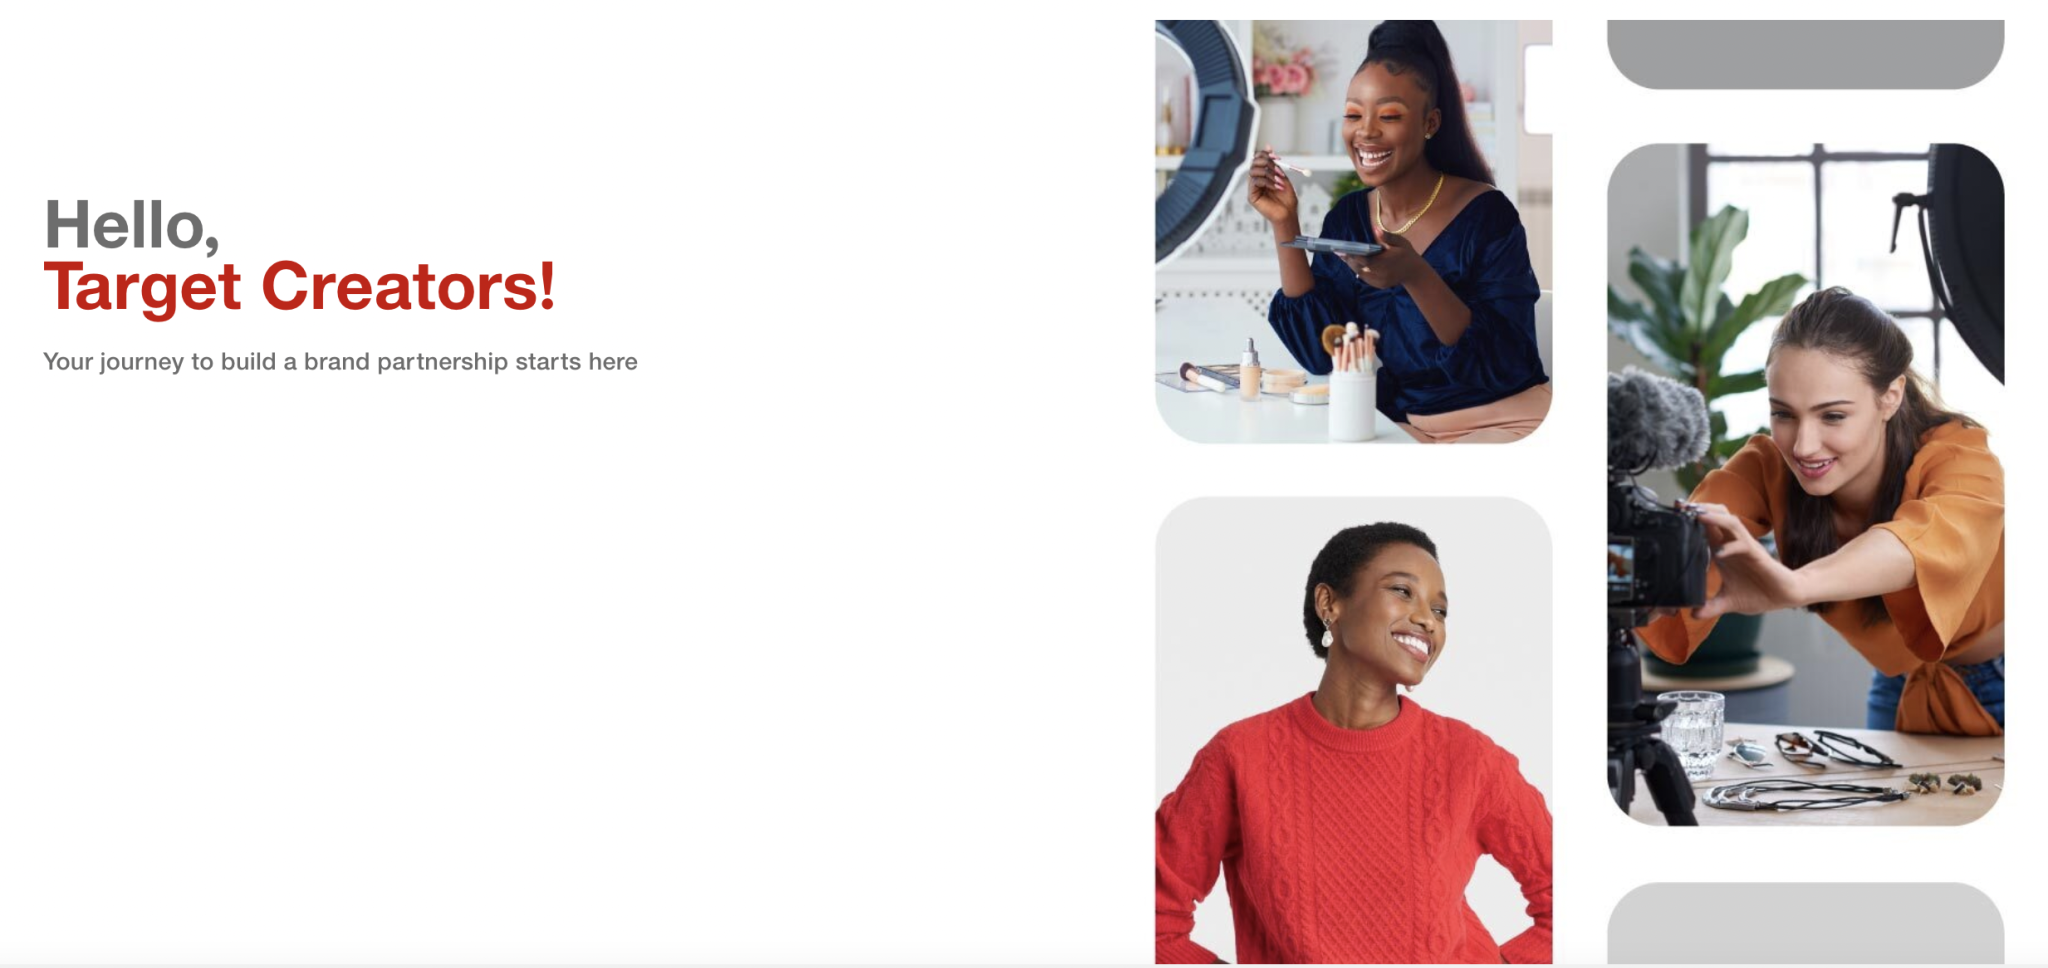 Target Launches a New Creator Marketplace with the Target Creator Program